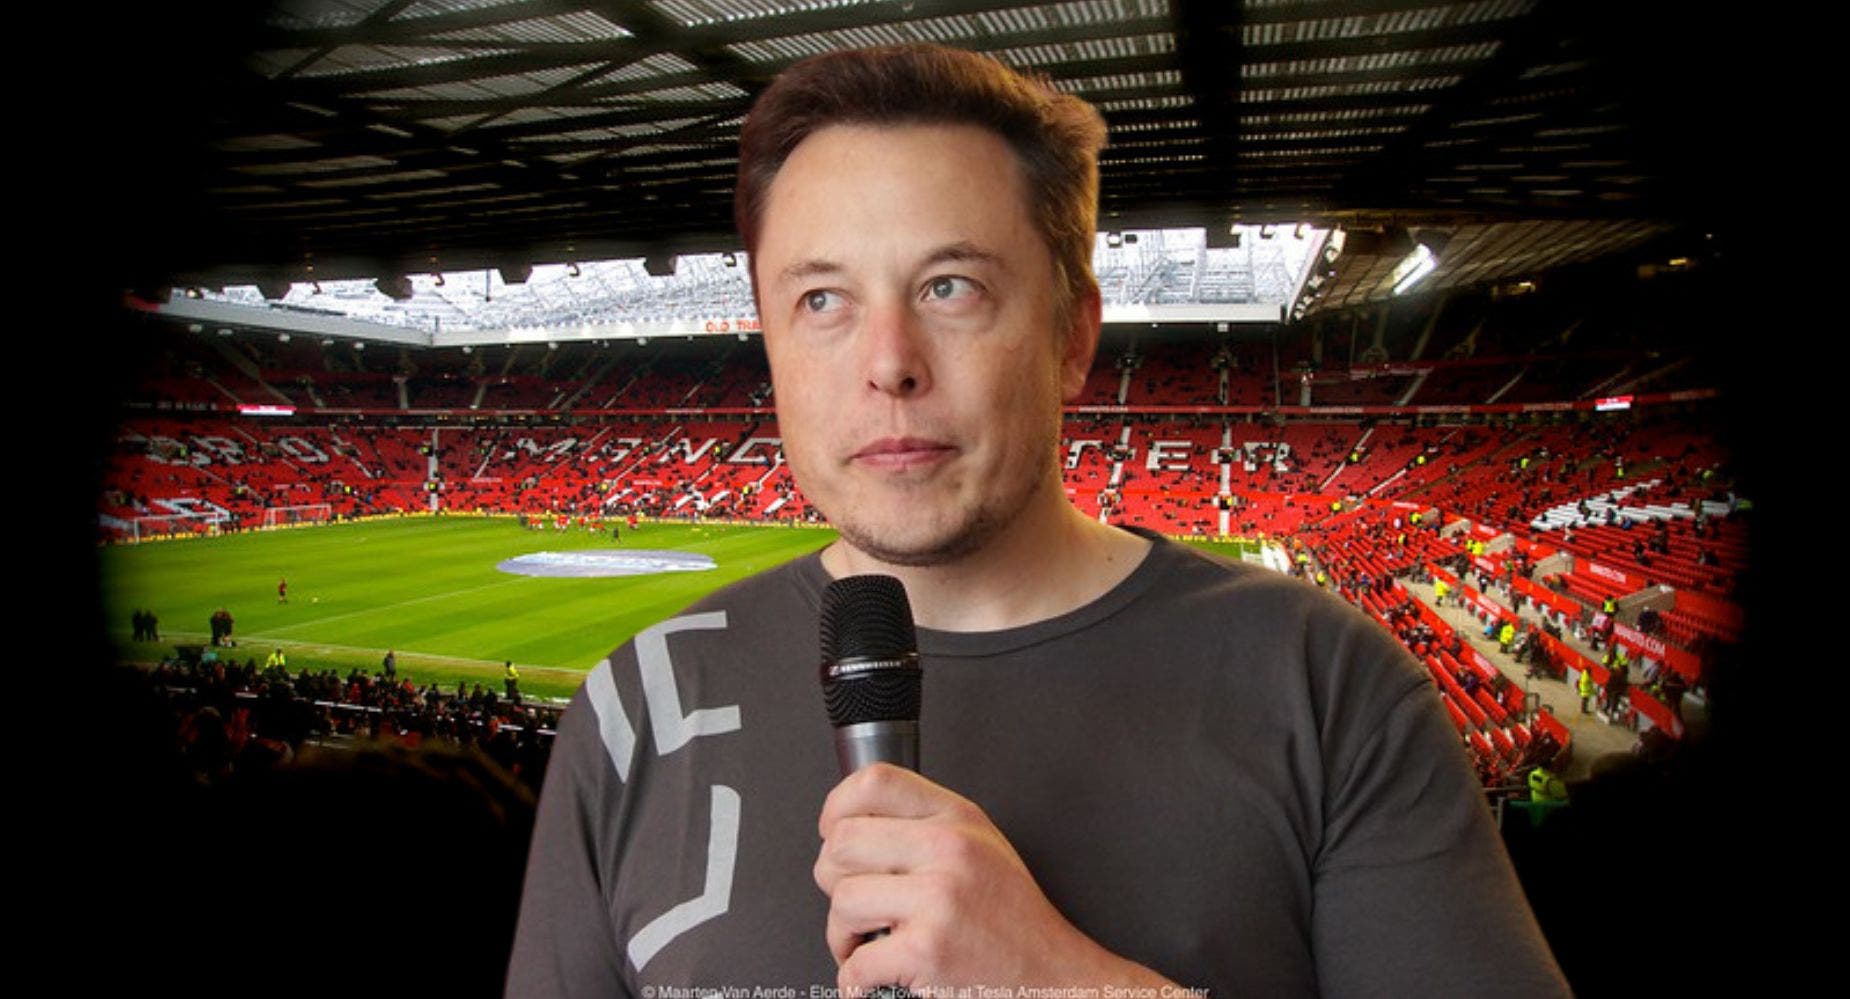 Maybe Musk Should Have Bought Manchester United After All: The Team Needs Help And Would Be Just 1% Of His Net Worth